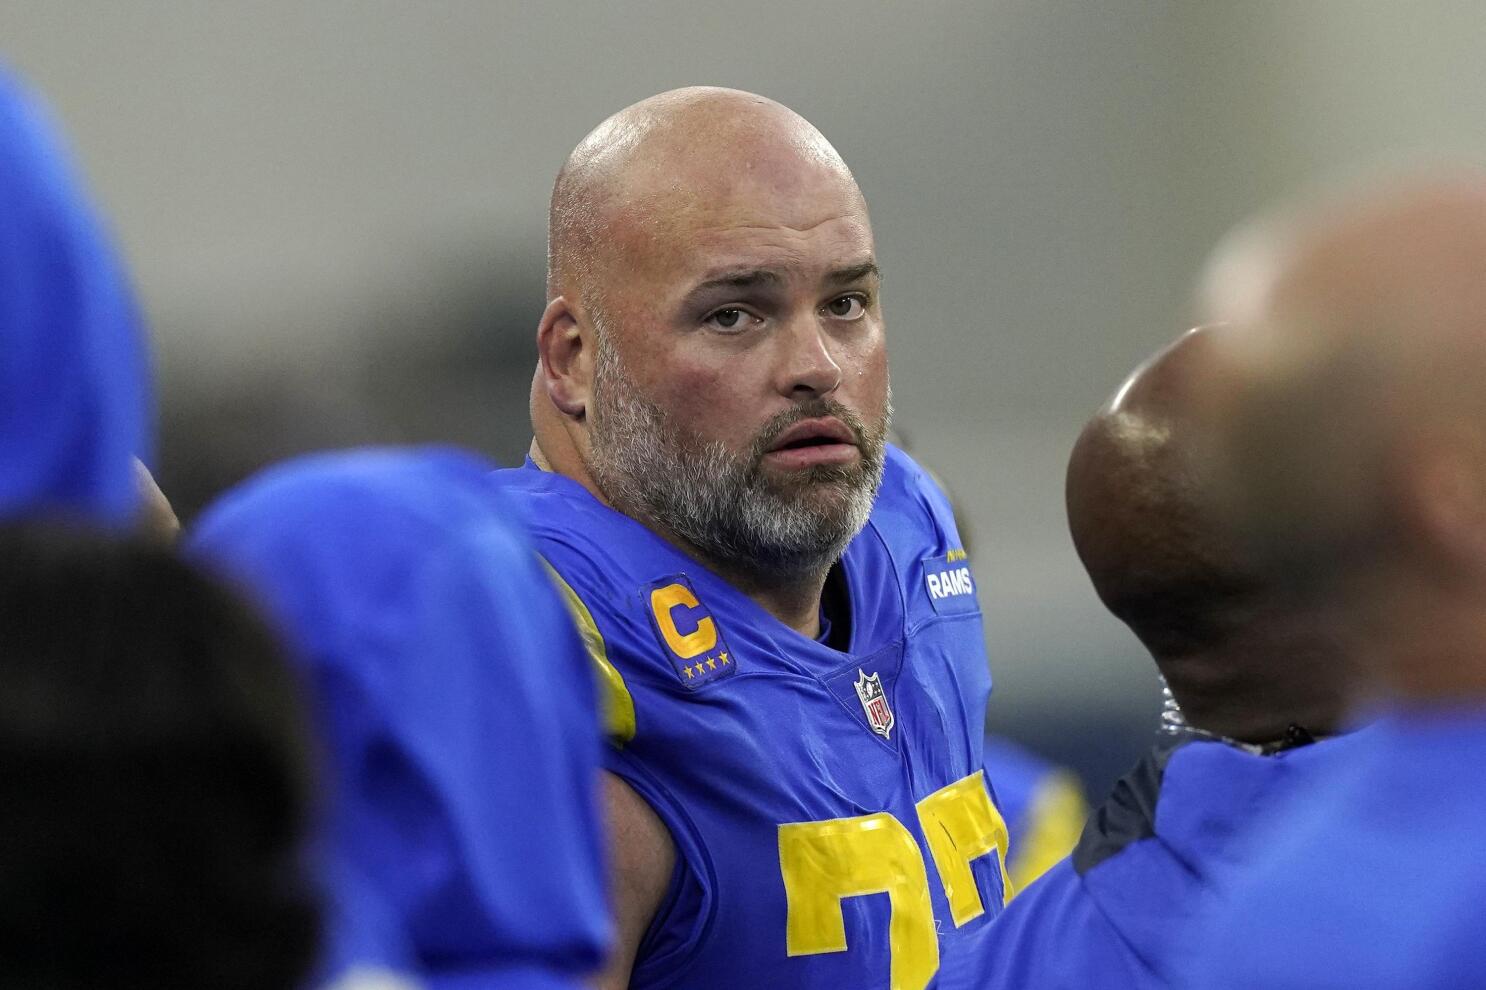 Rams won't have LT Whitworth, S Rapp against Buccaneers